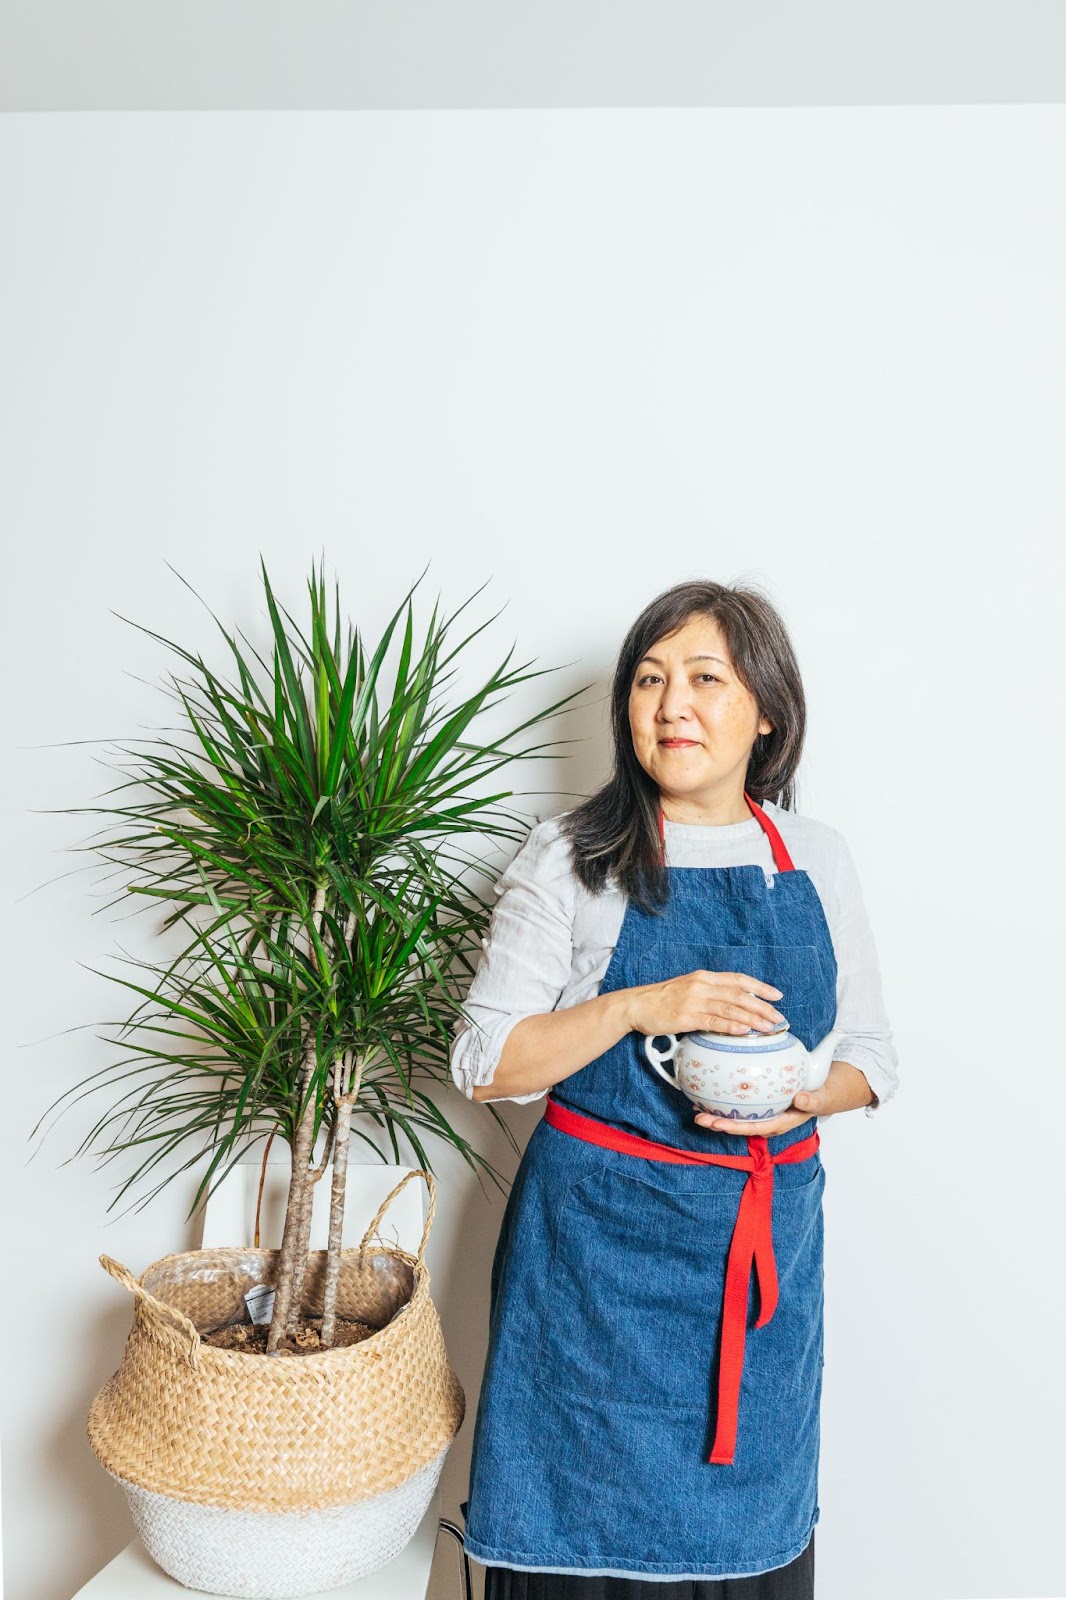 Reclaiming Chinese postpartum traditions founder of Feeding Mama, Mona Stillwell, standing beside a plant and holding a tea cup.